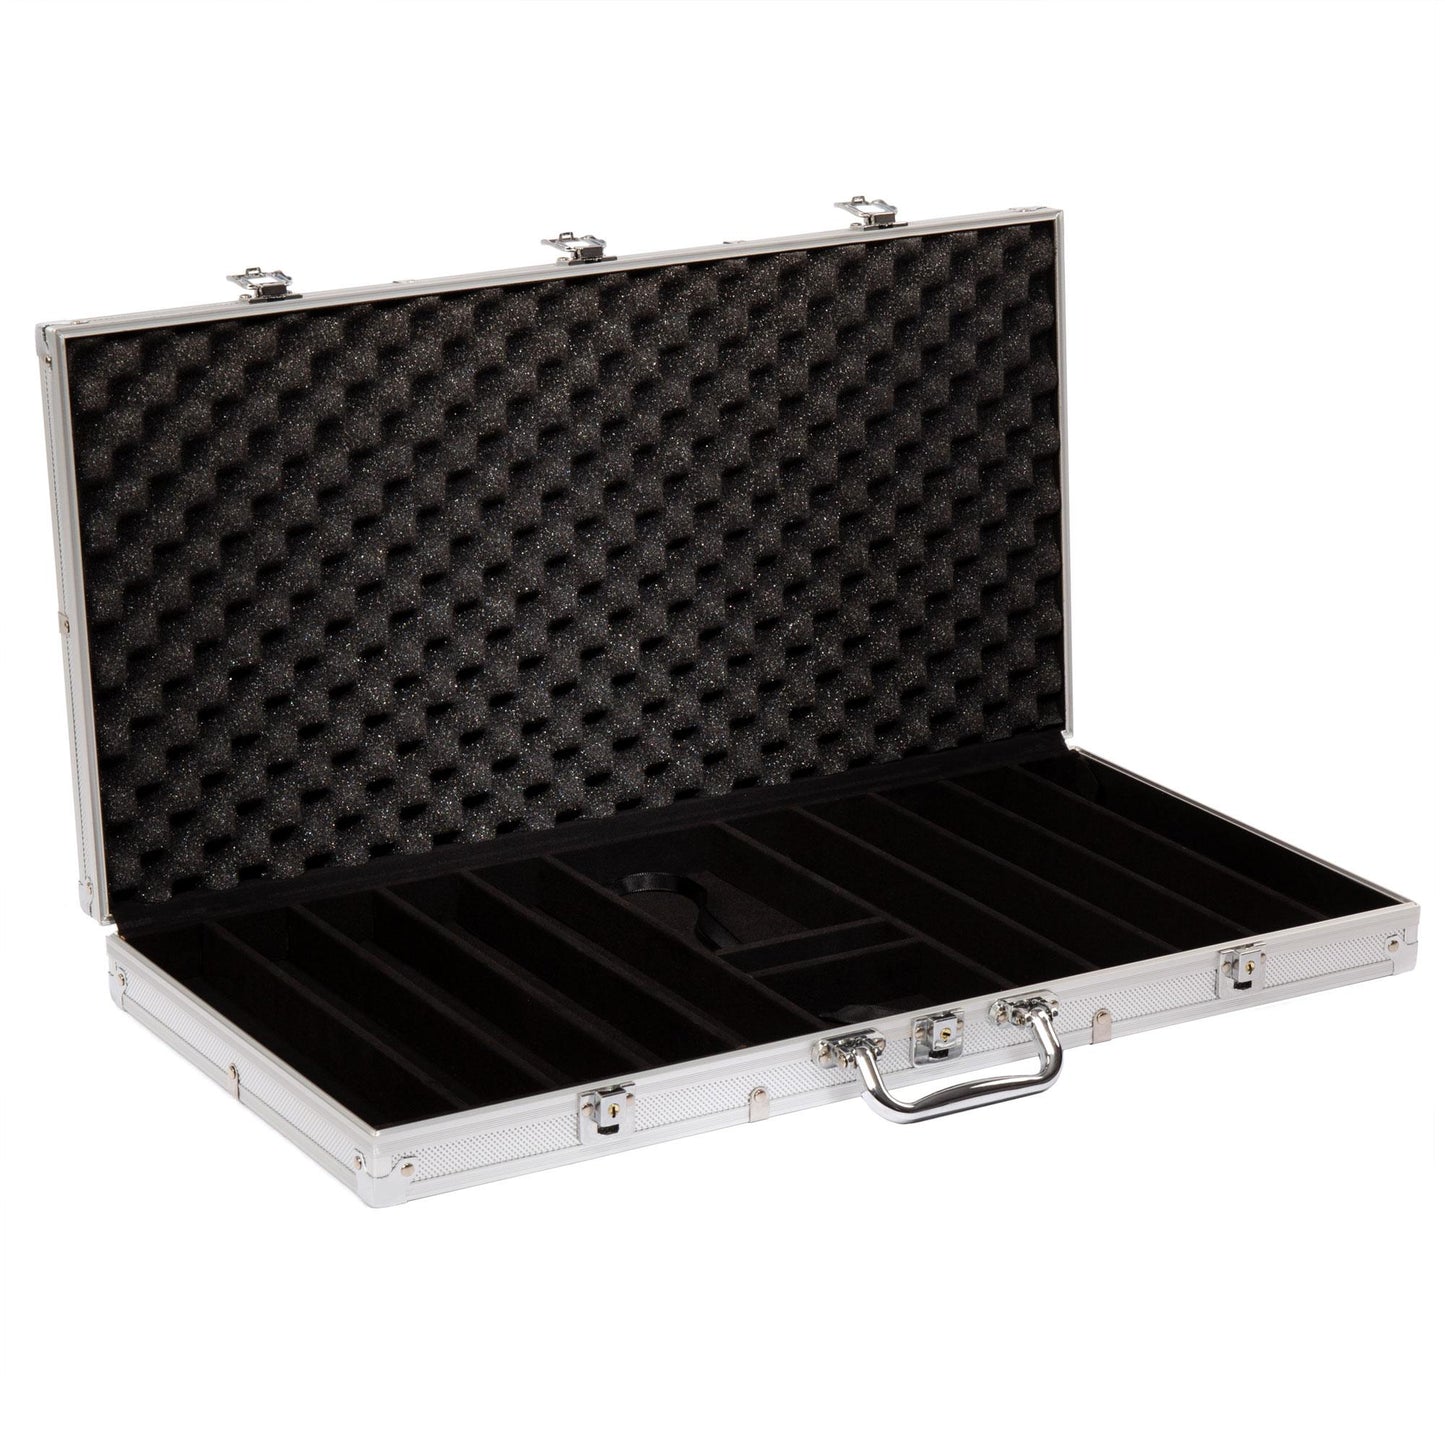 750 Suited Poker Chips with Aluminum Case